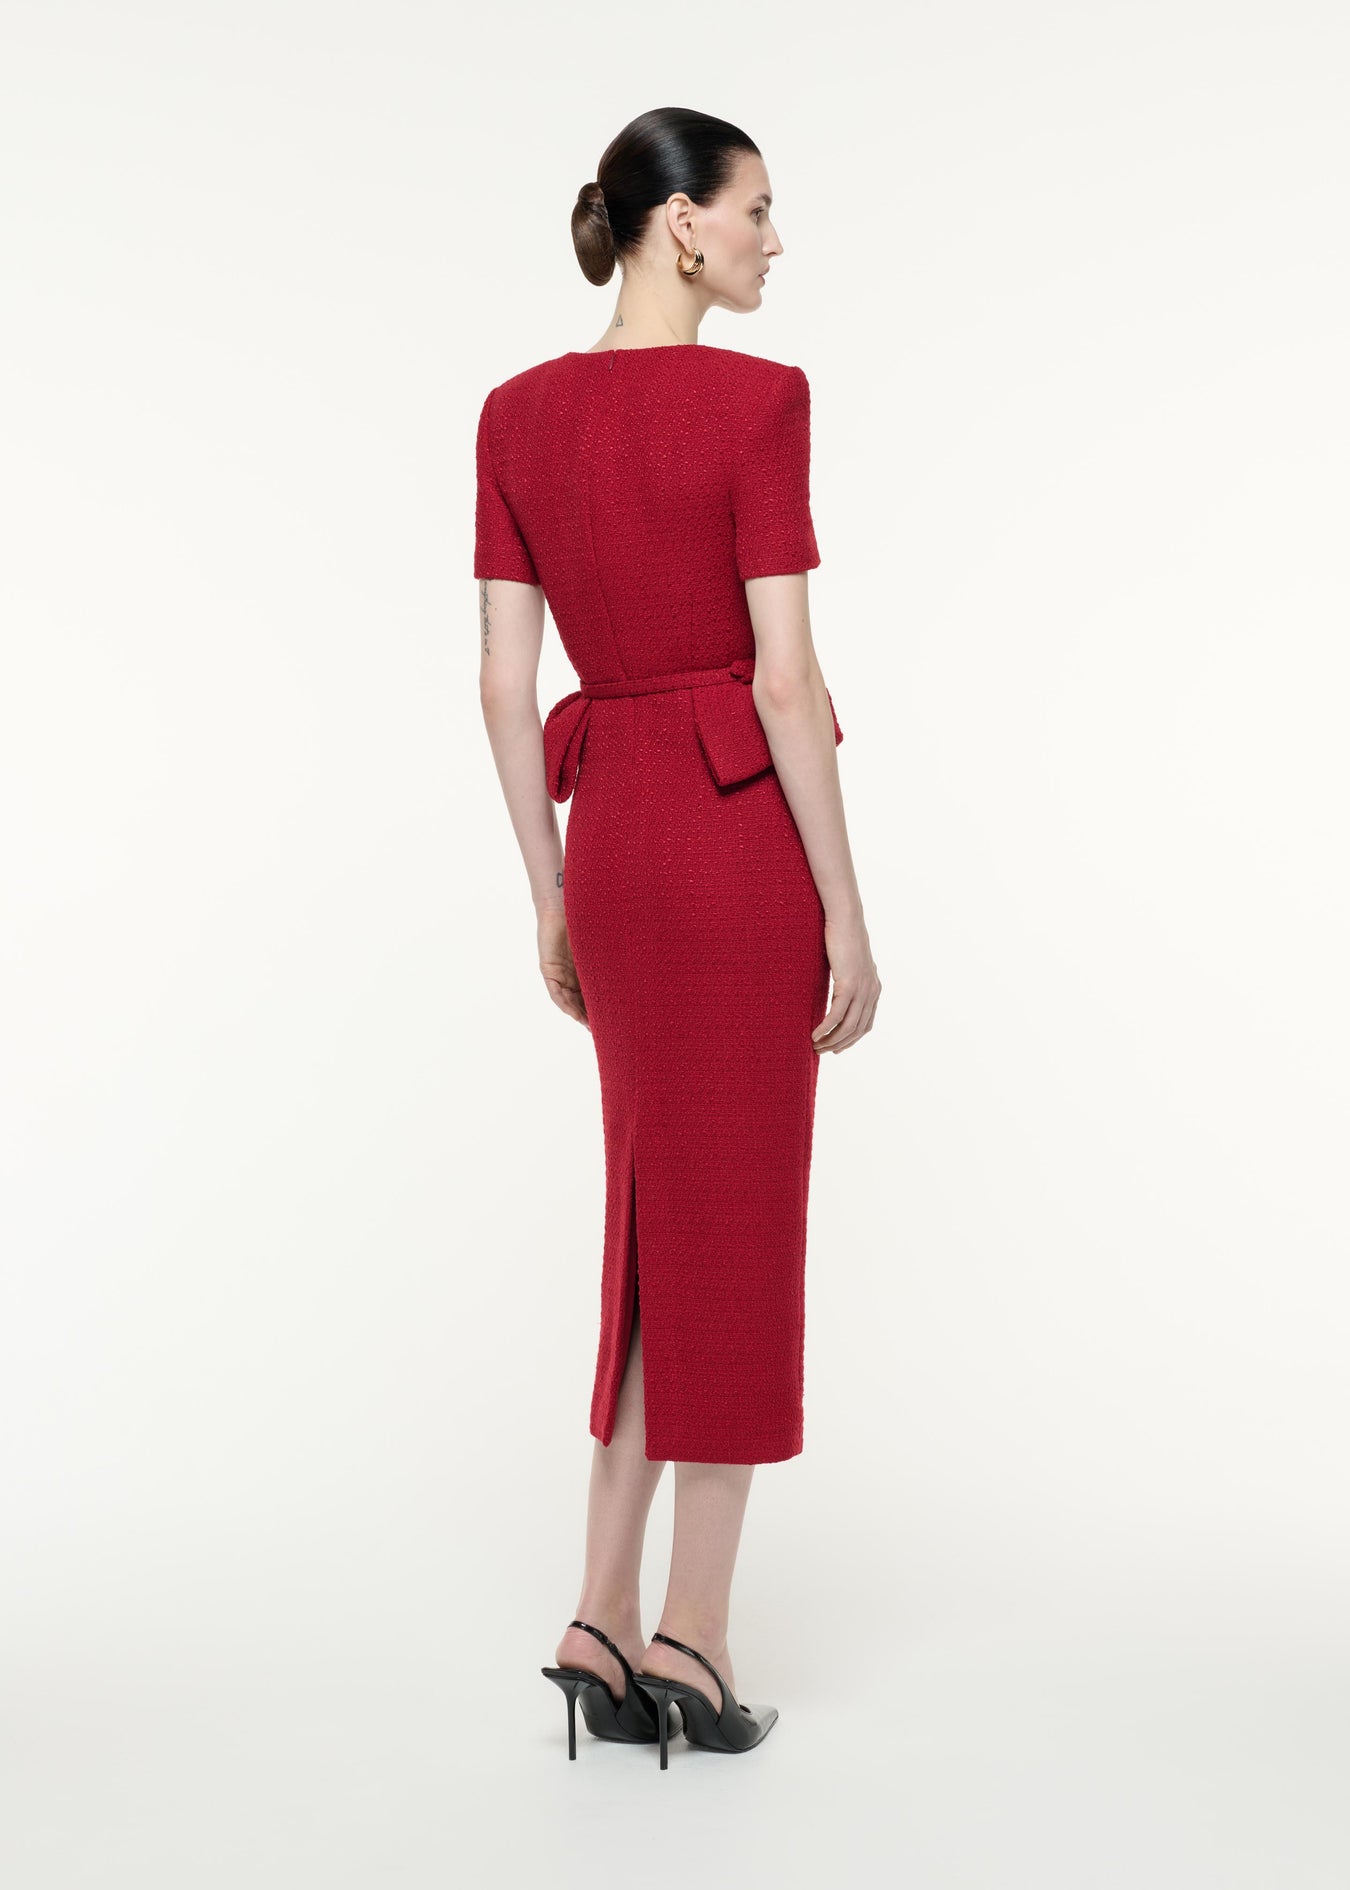 A back view image of a model wearing the Short Sleeve Boucle Midi Dress in Red